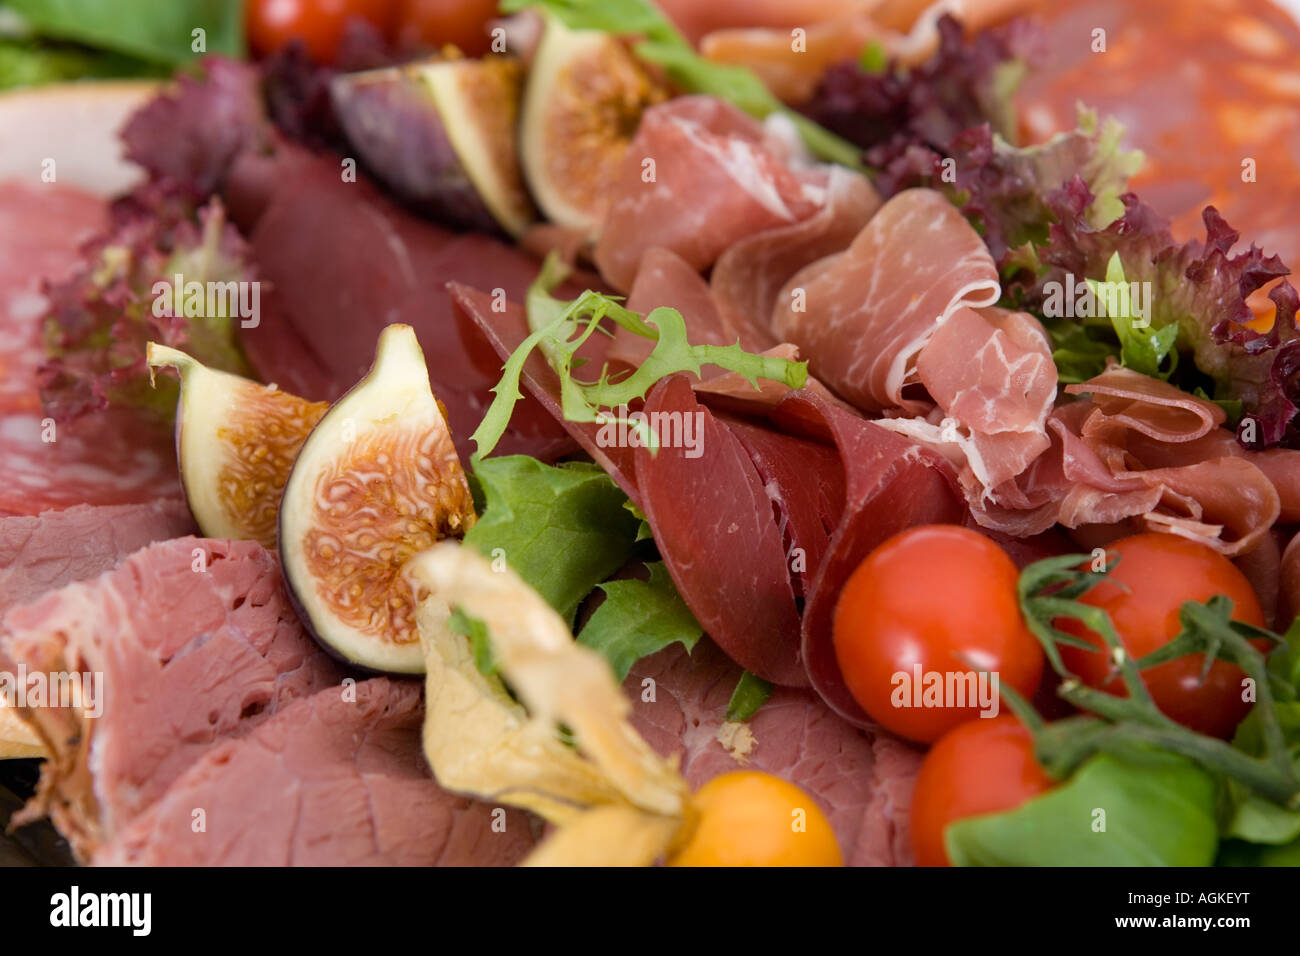 Selection of cold meats with salad Stock Photo